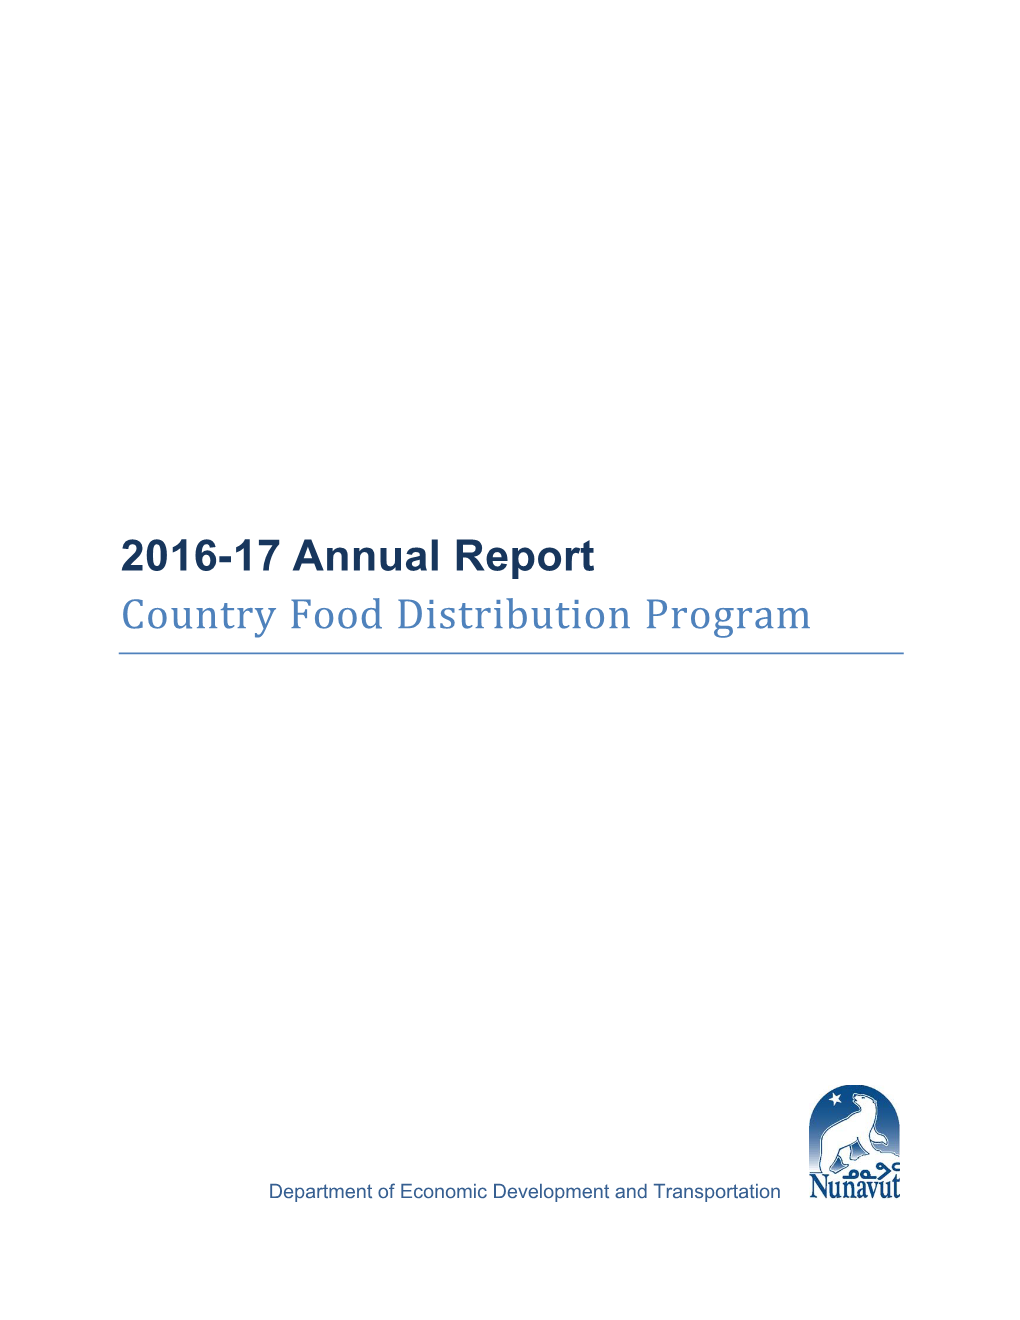 2016-17 Annual Report Country Food Distribution Program